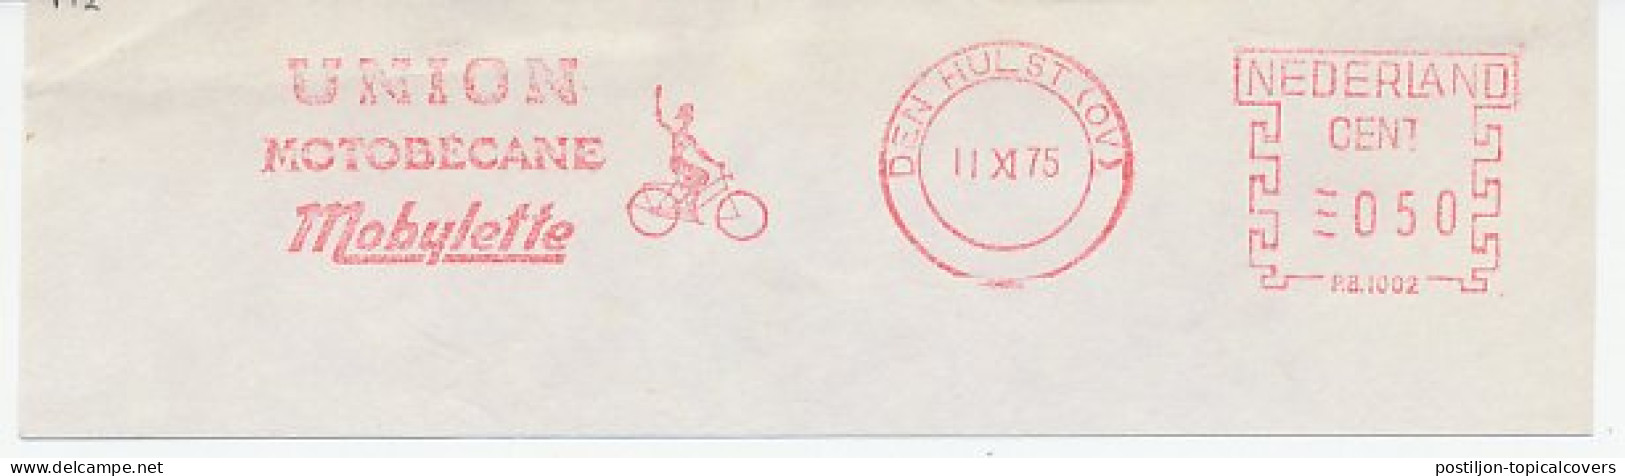 Meter Cut Netherlands 1975 Bicycle - Union - Motobecane - Mobylette - Cycling